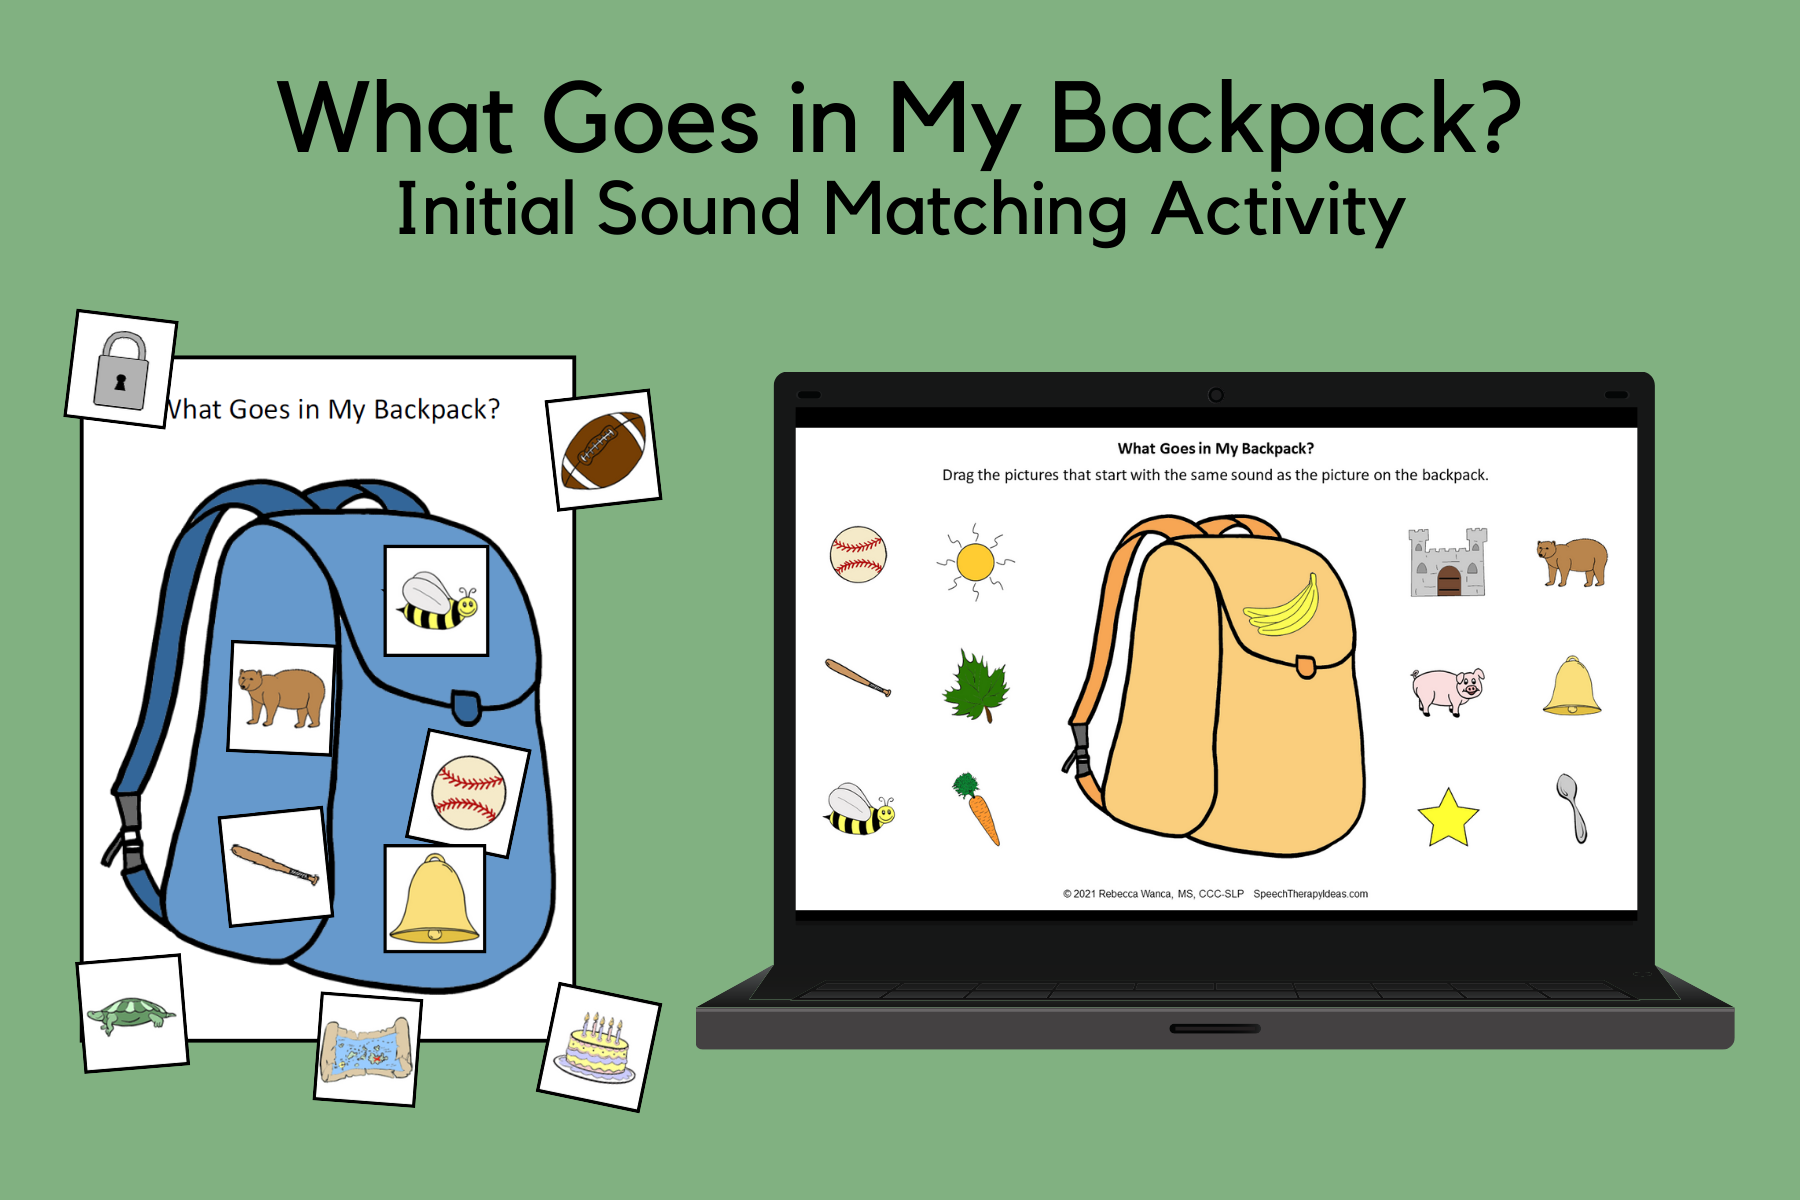 What Goes in My Backpack? – Initial Sound Matching Activity